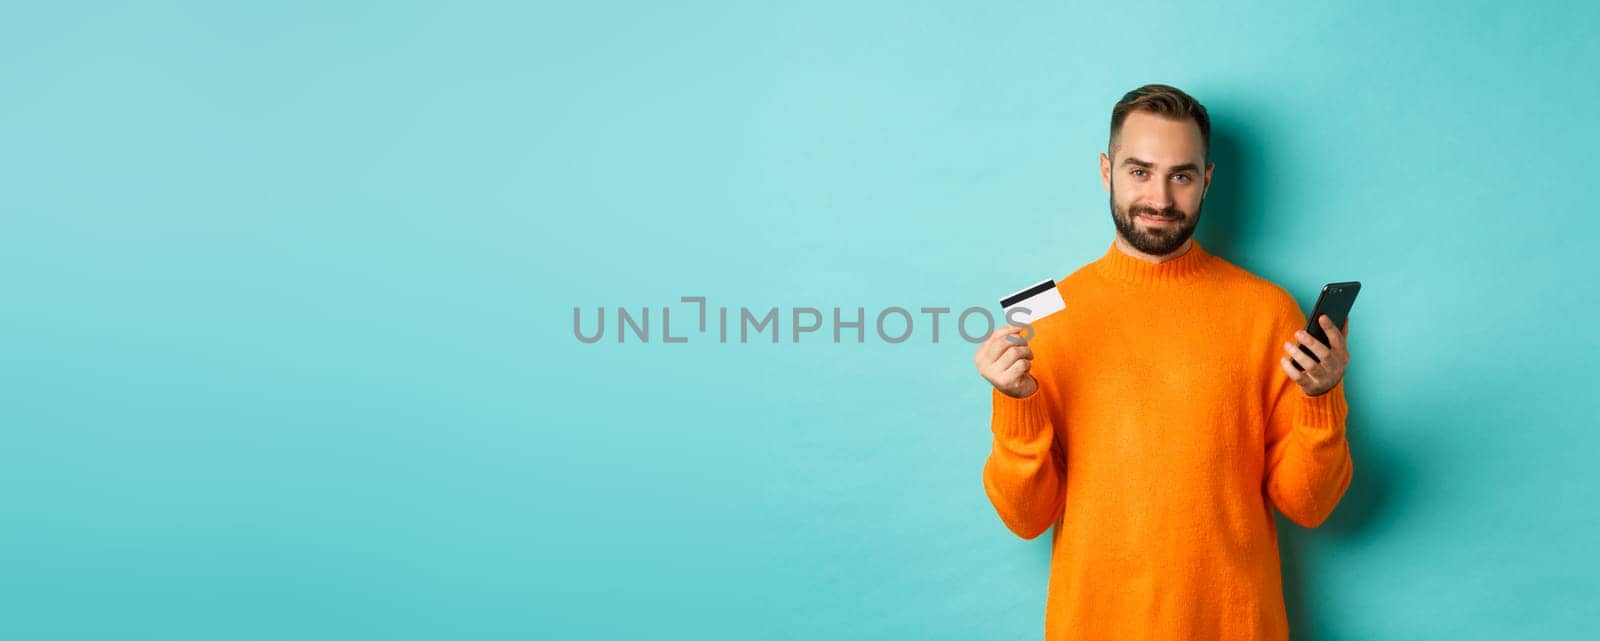 Online shopping. Handsome caucasian man in orange sweater, using credit card and mobile phone, standing over light blue background.